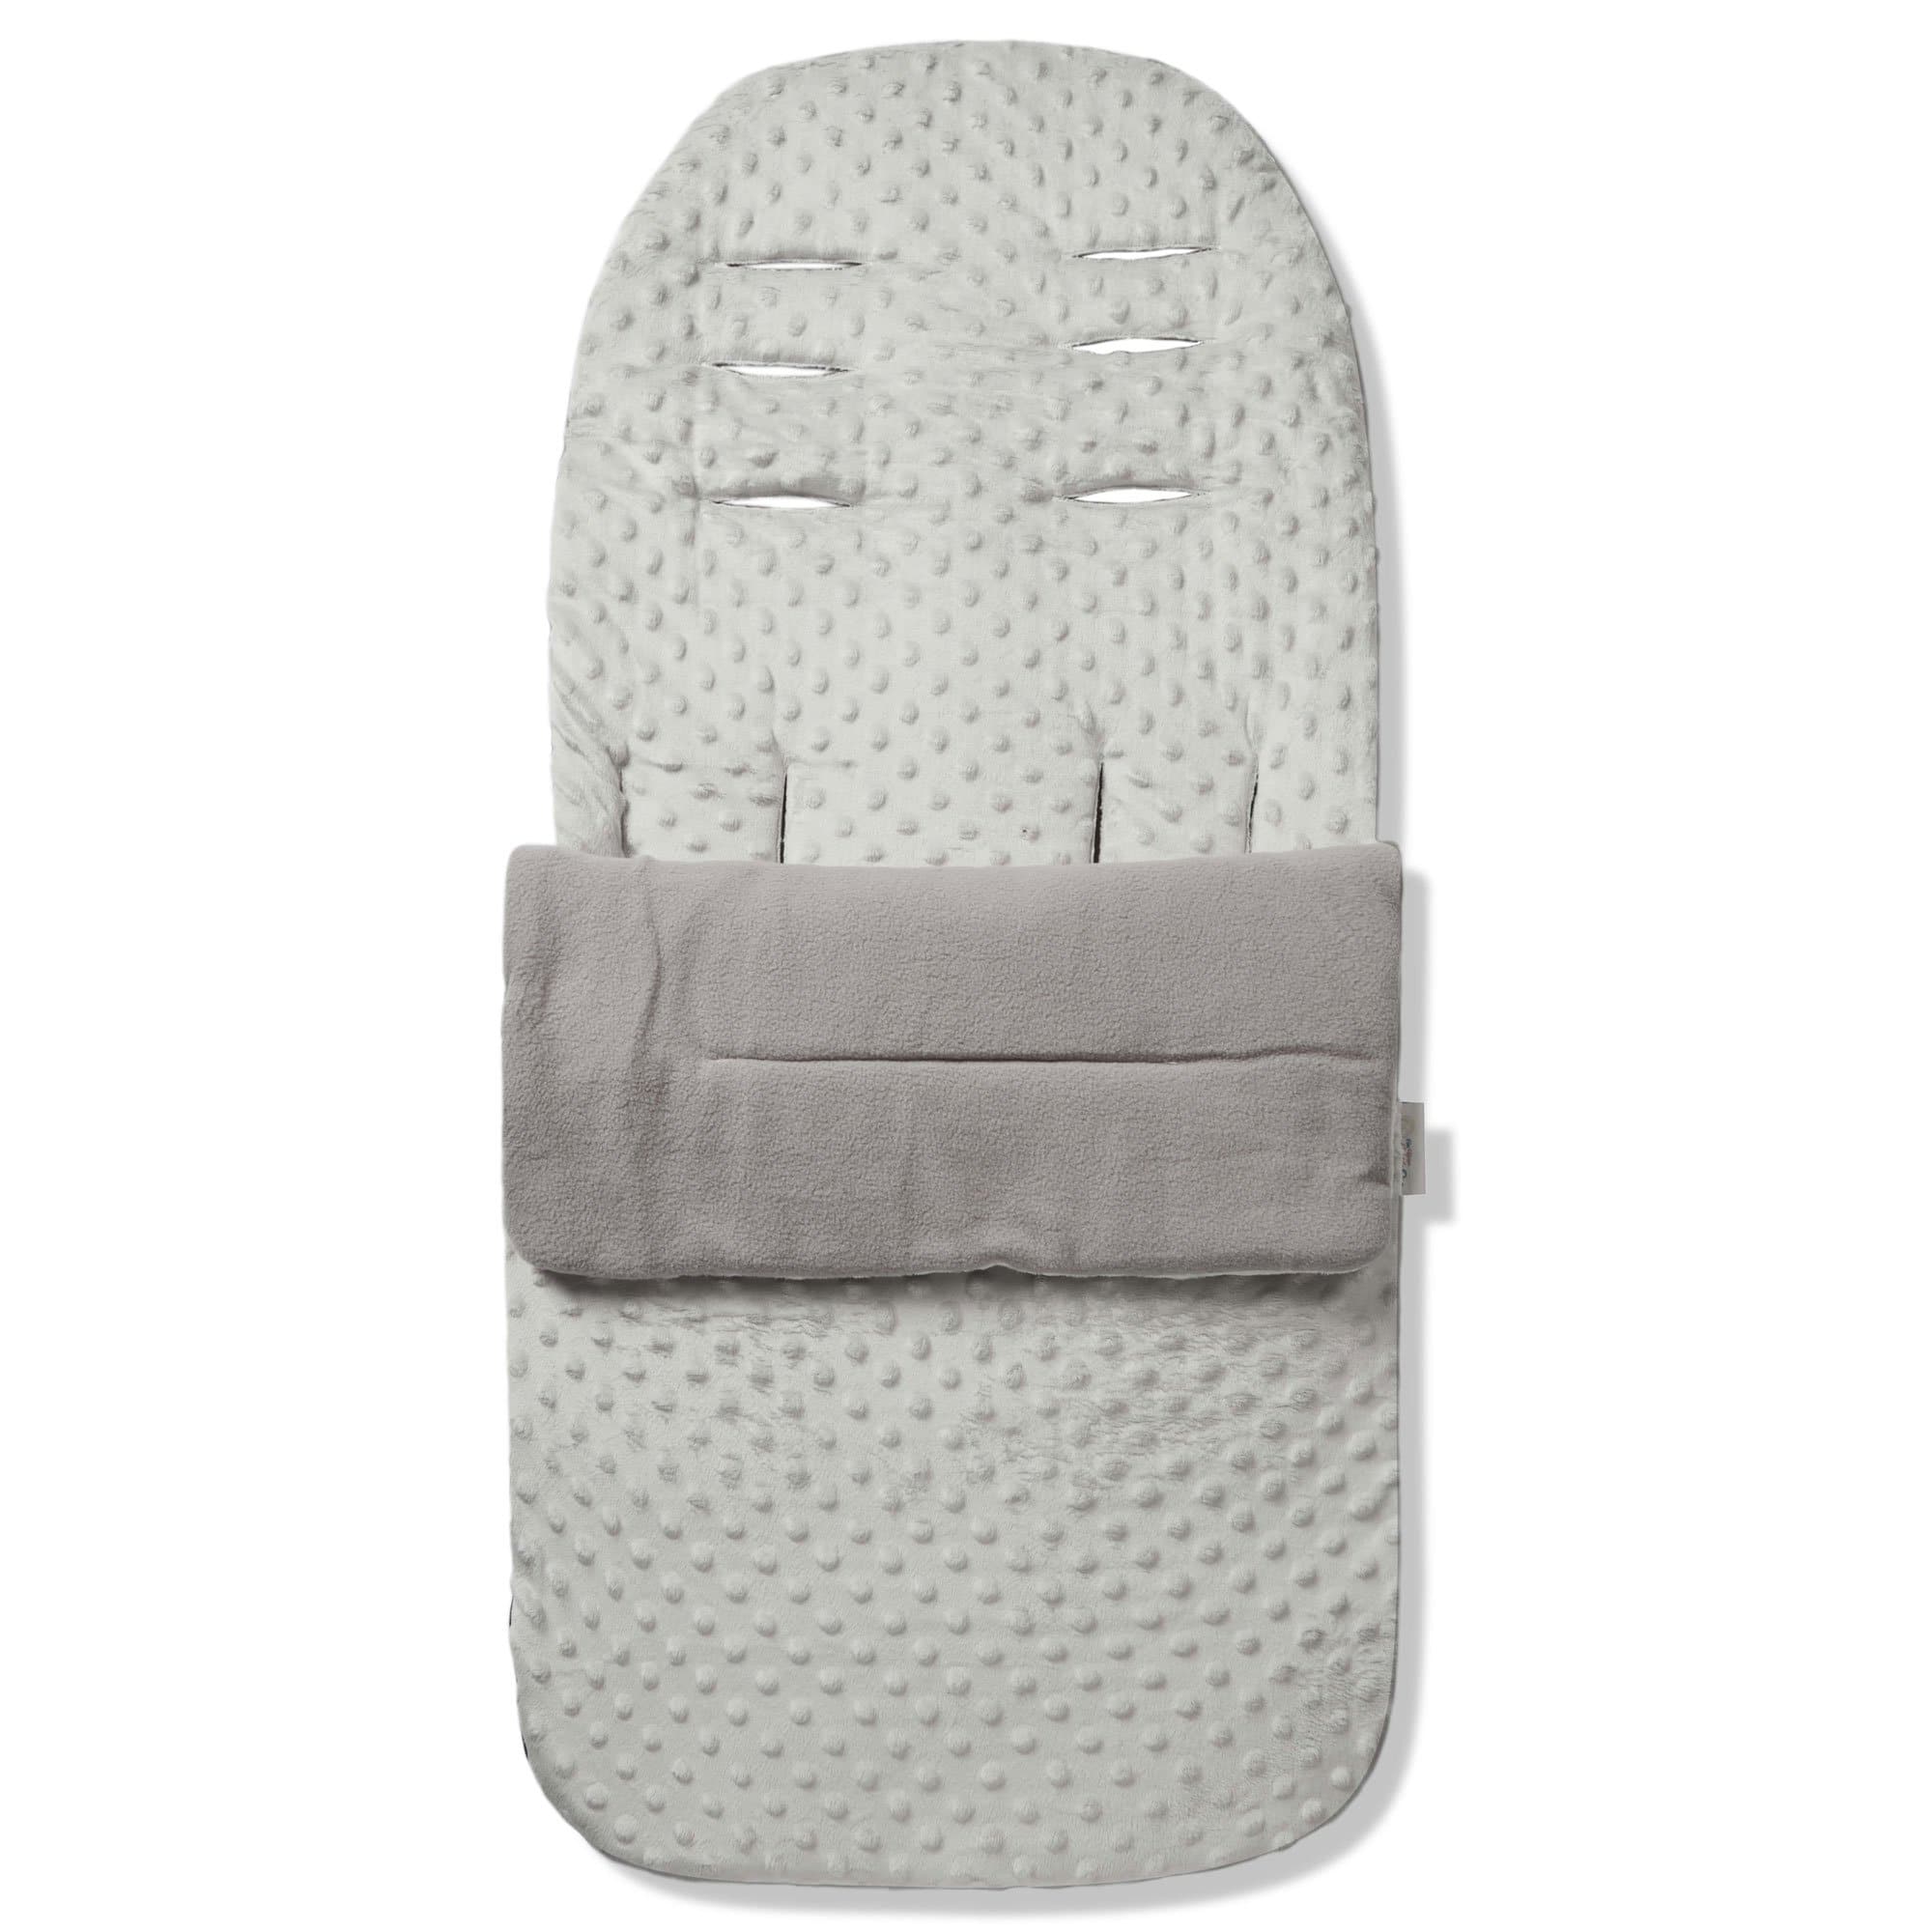 Dimple Footmuff / Cosy Toes Compatible with Red Kite - Grey / Fits All Models | For Your Little One